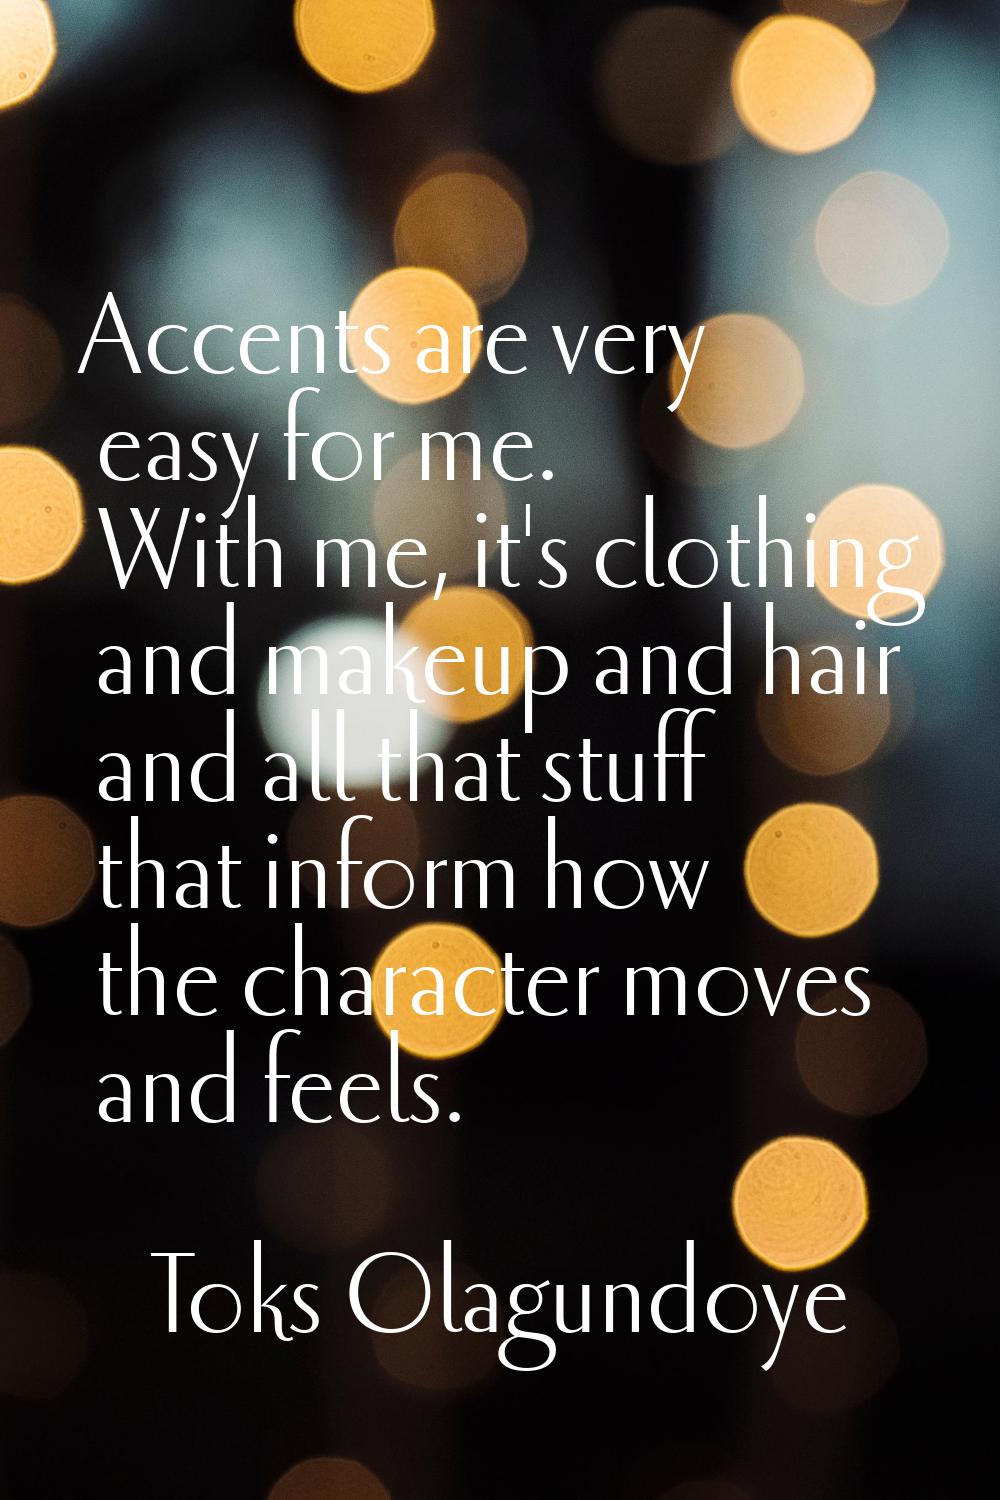 Accents are very easy for me. With me, it's clothing and makeup and hair and all that stuff that in